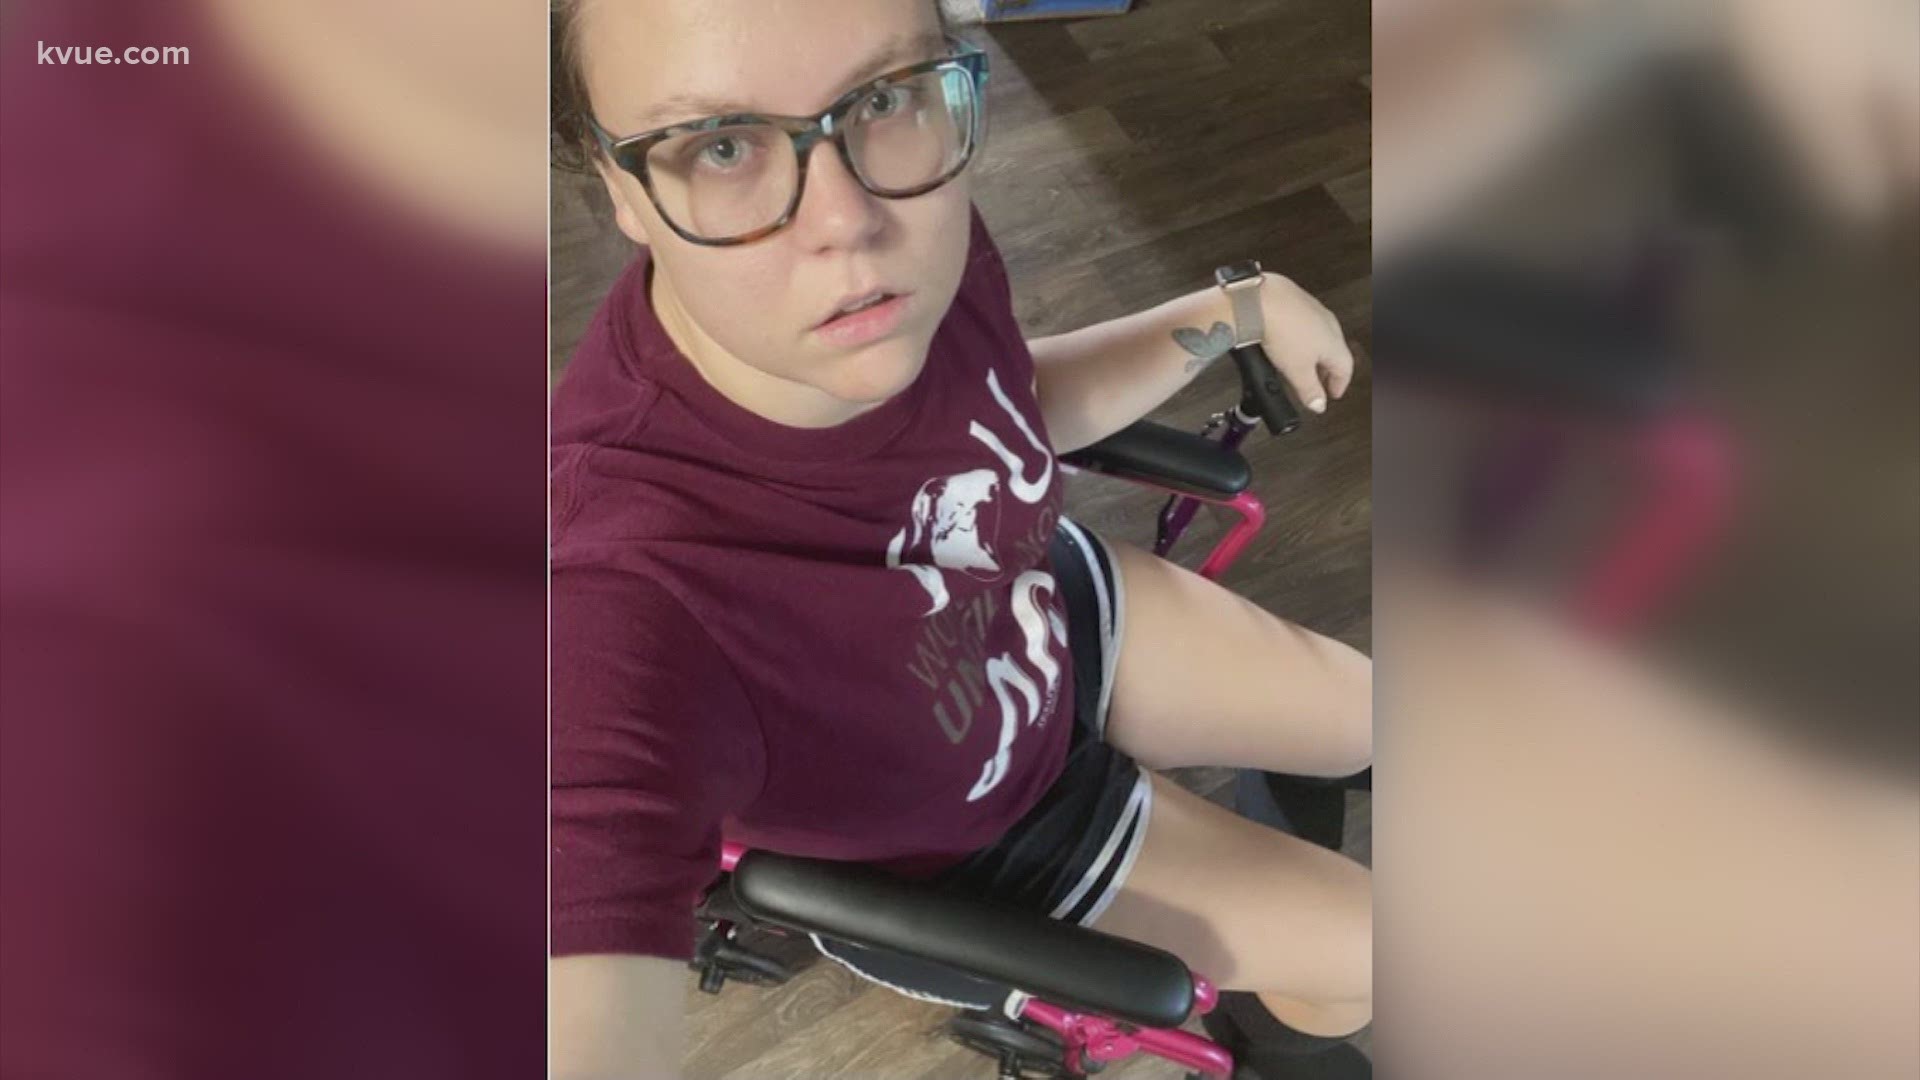 In the past nine months, Miranda Erlanson said she's visited the emergency room three times and has been hospitalized 17 times. Now, she's in a wheelchair.